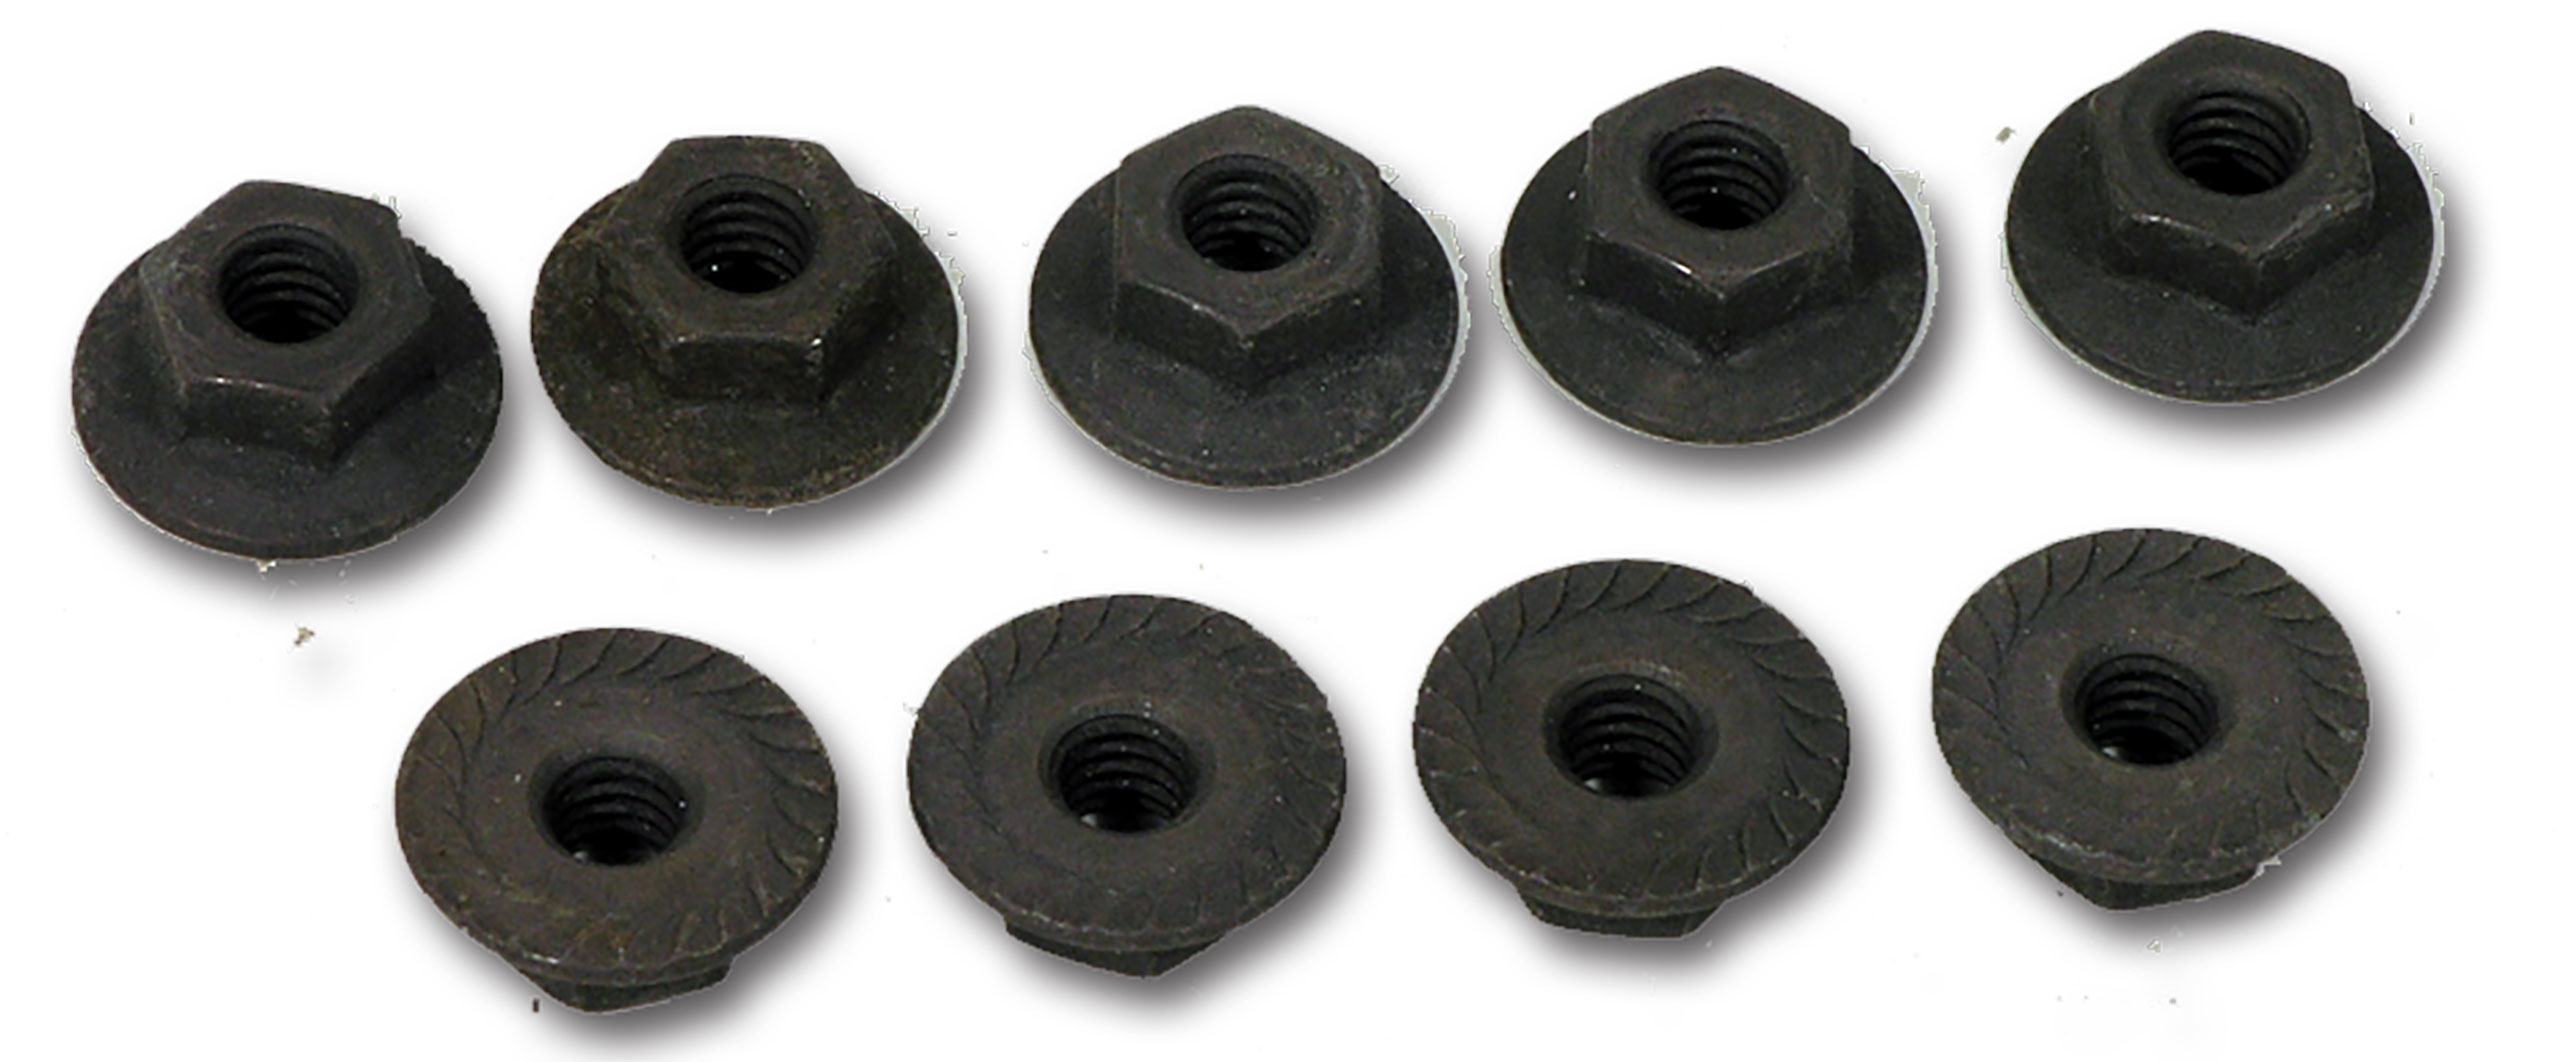 C2 1963-1967 Chevrolet Corvette Outer Heater Box Cover Nuts. W/Air Conditioning 9 Piece - Auto Accessories of America